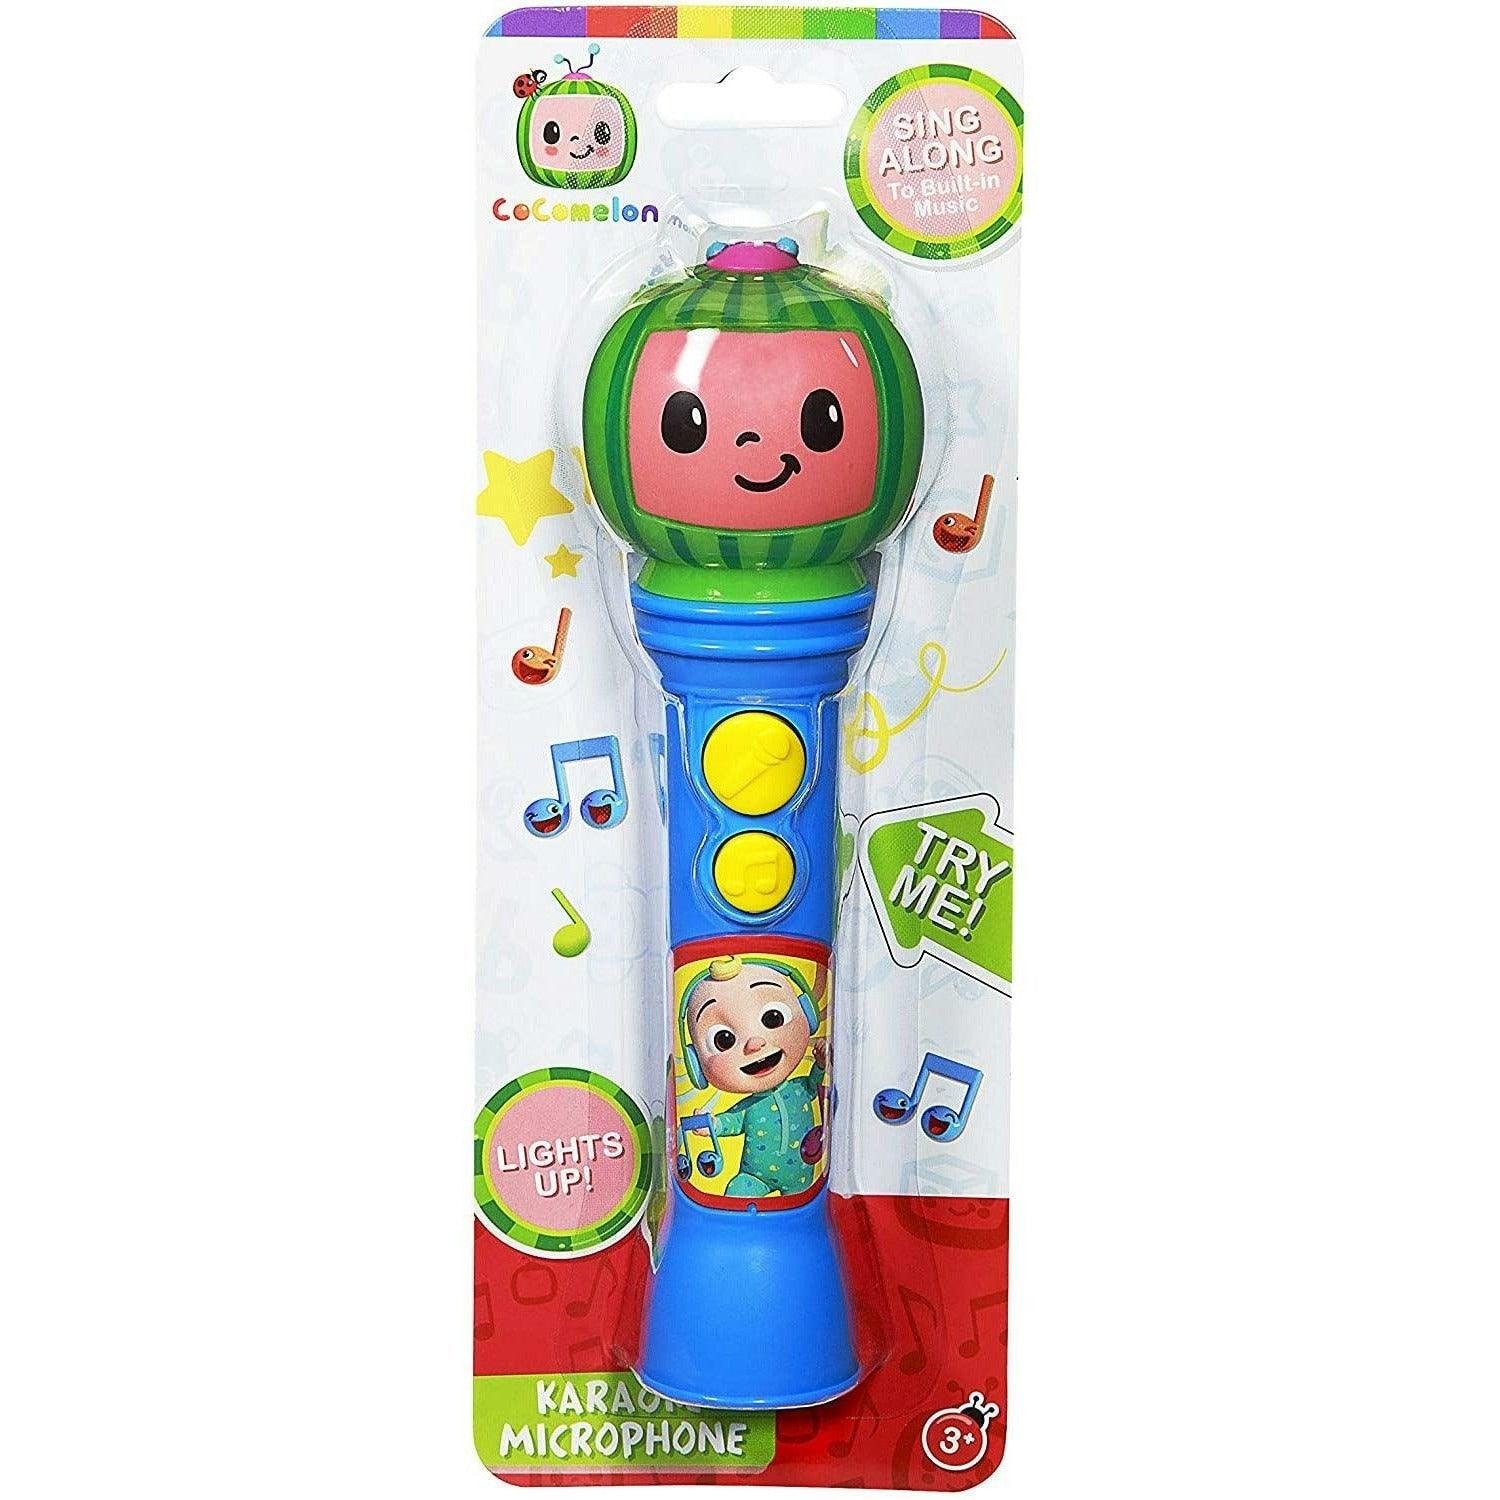 Cocomelon Toy Microphone for Kids, Musical Toy with Built-in Songs, Kids Microphone - BumbleToys - 0-24 Months, Action Figures, Boys, Cocomelon, Musical Instruments, OXE, Phone, Pre-Order